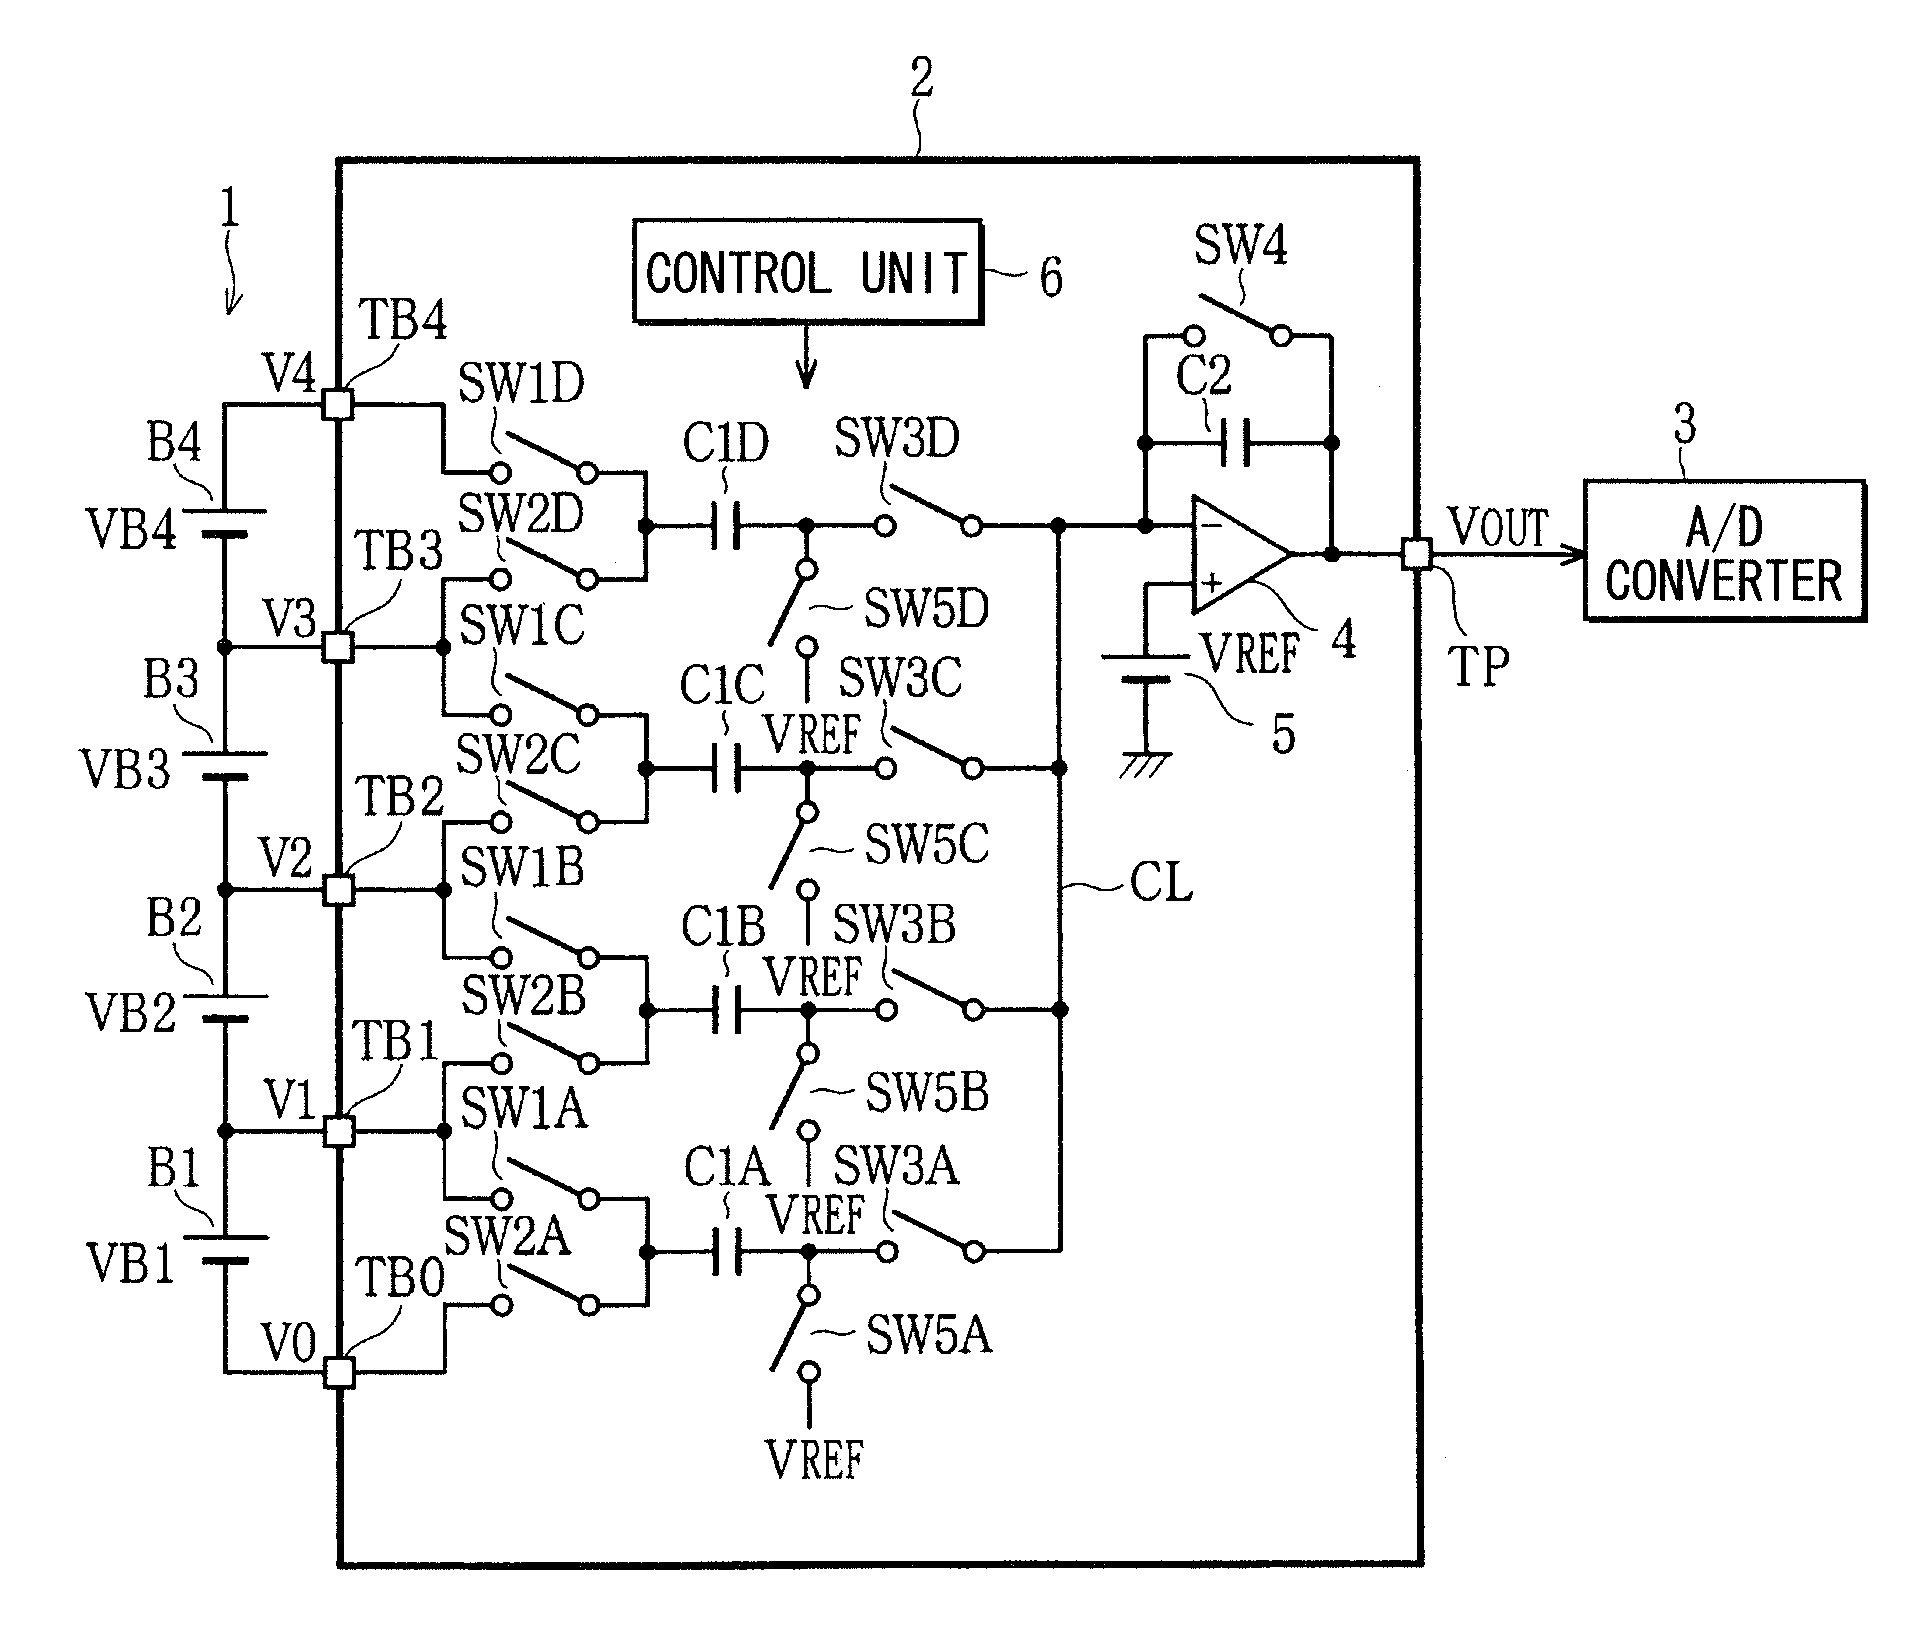 Voltage detection device for assembled battery